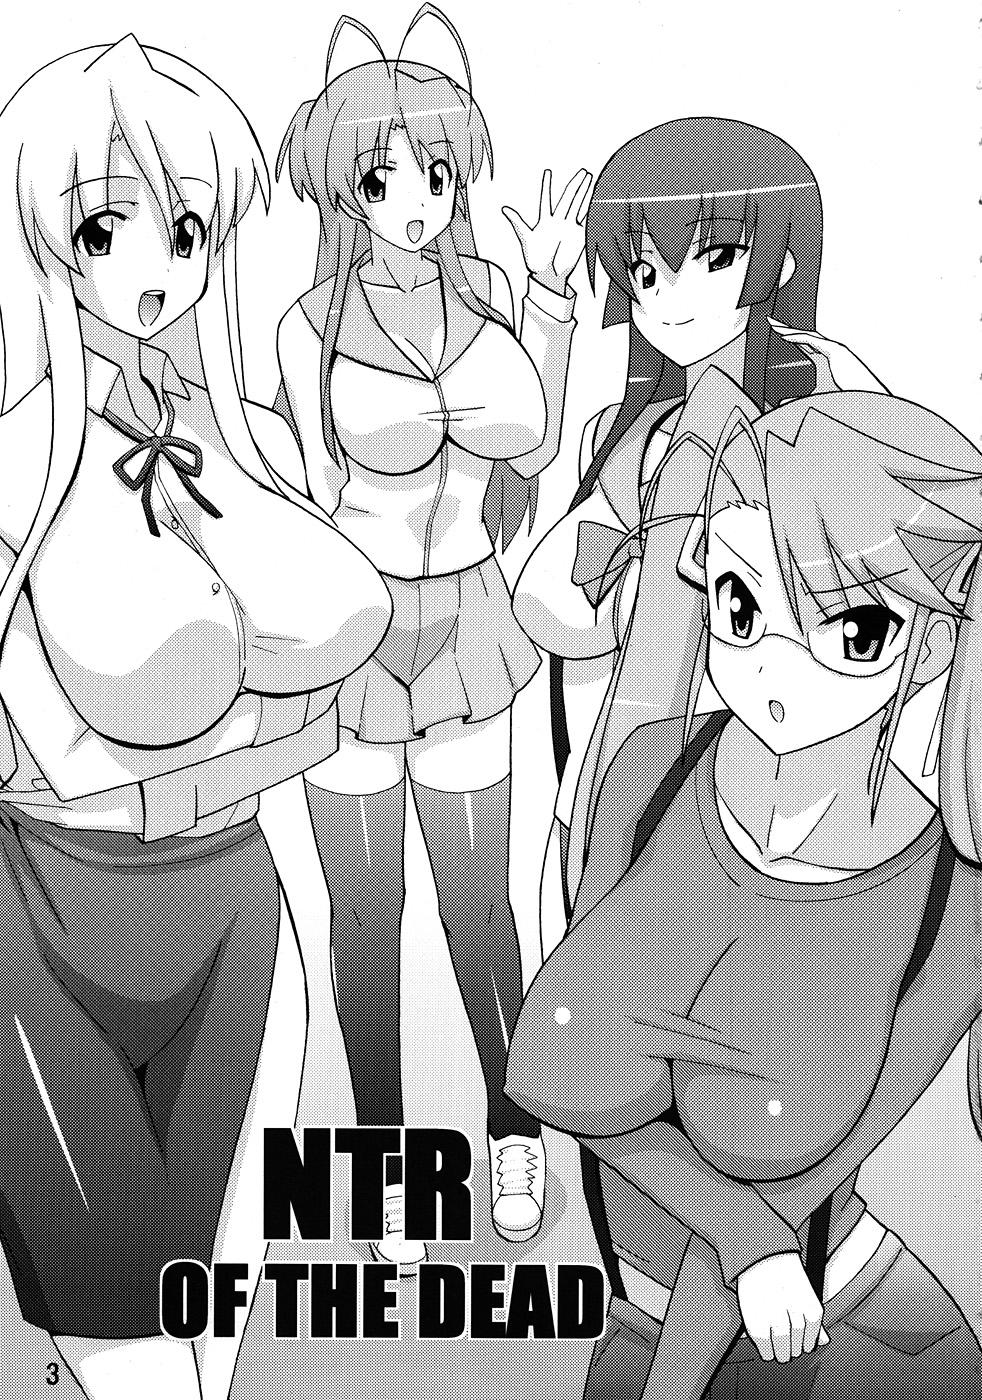 Femboy NTR OF THE DEAD - Highschool of the dead Horny Slut - Page 2